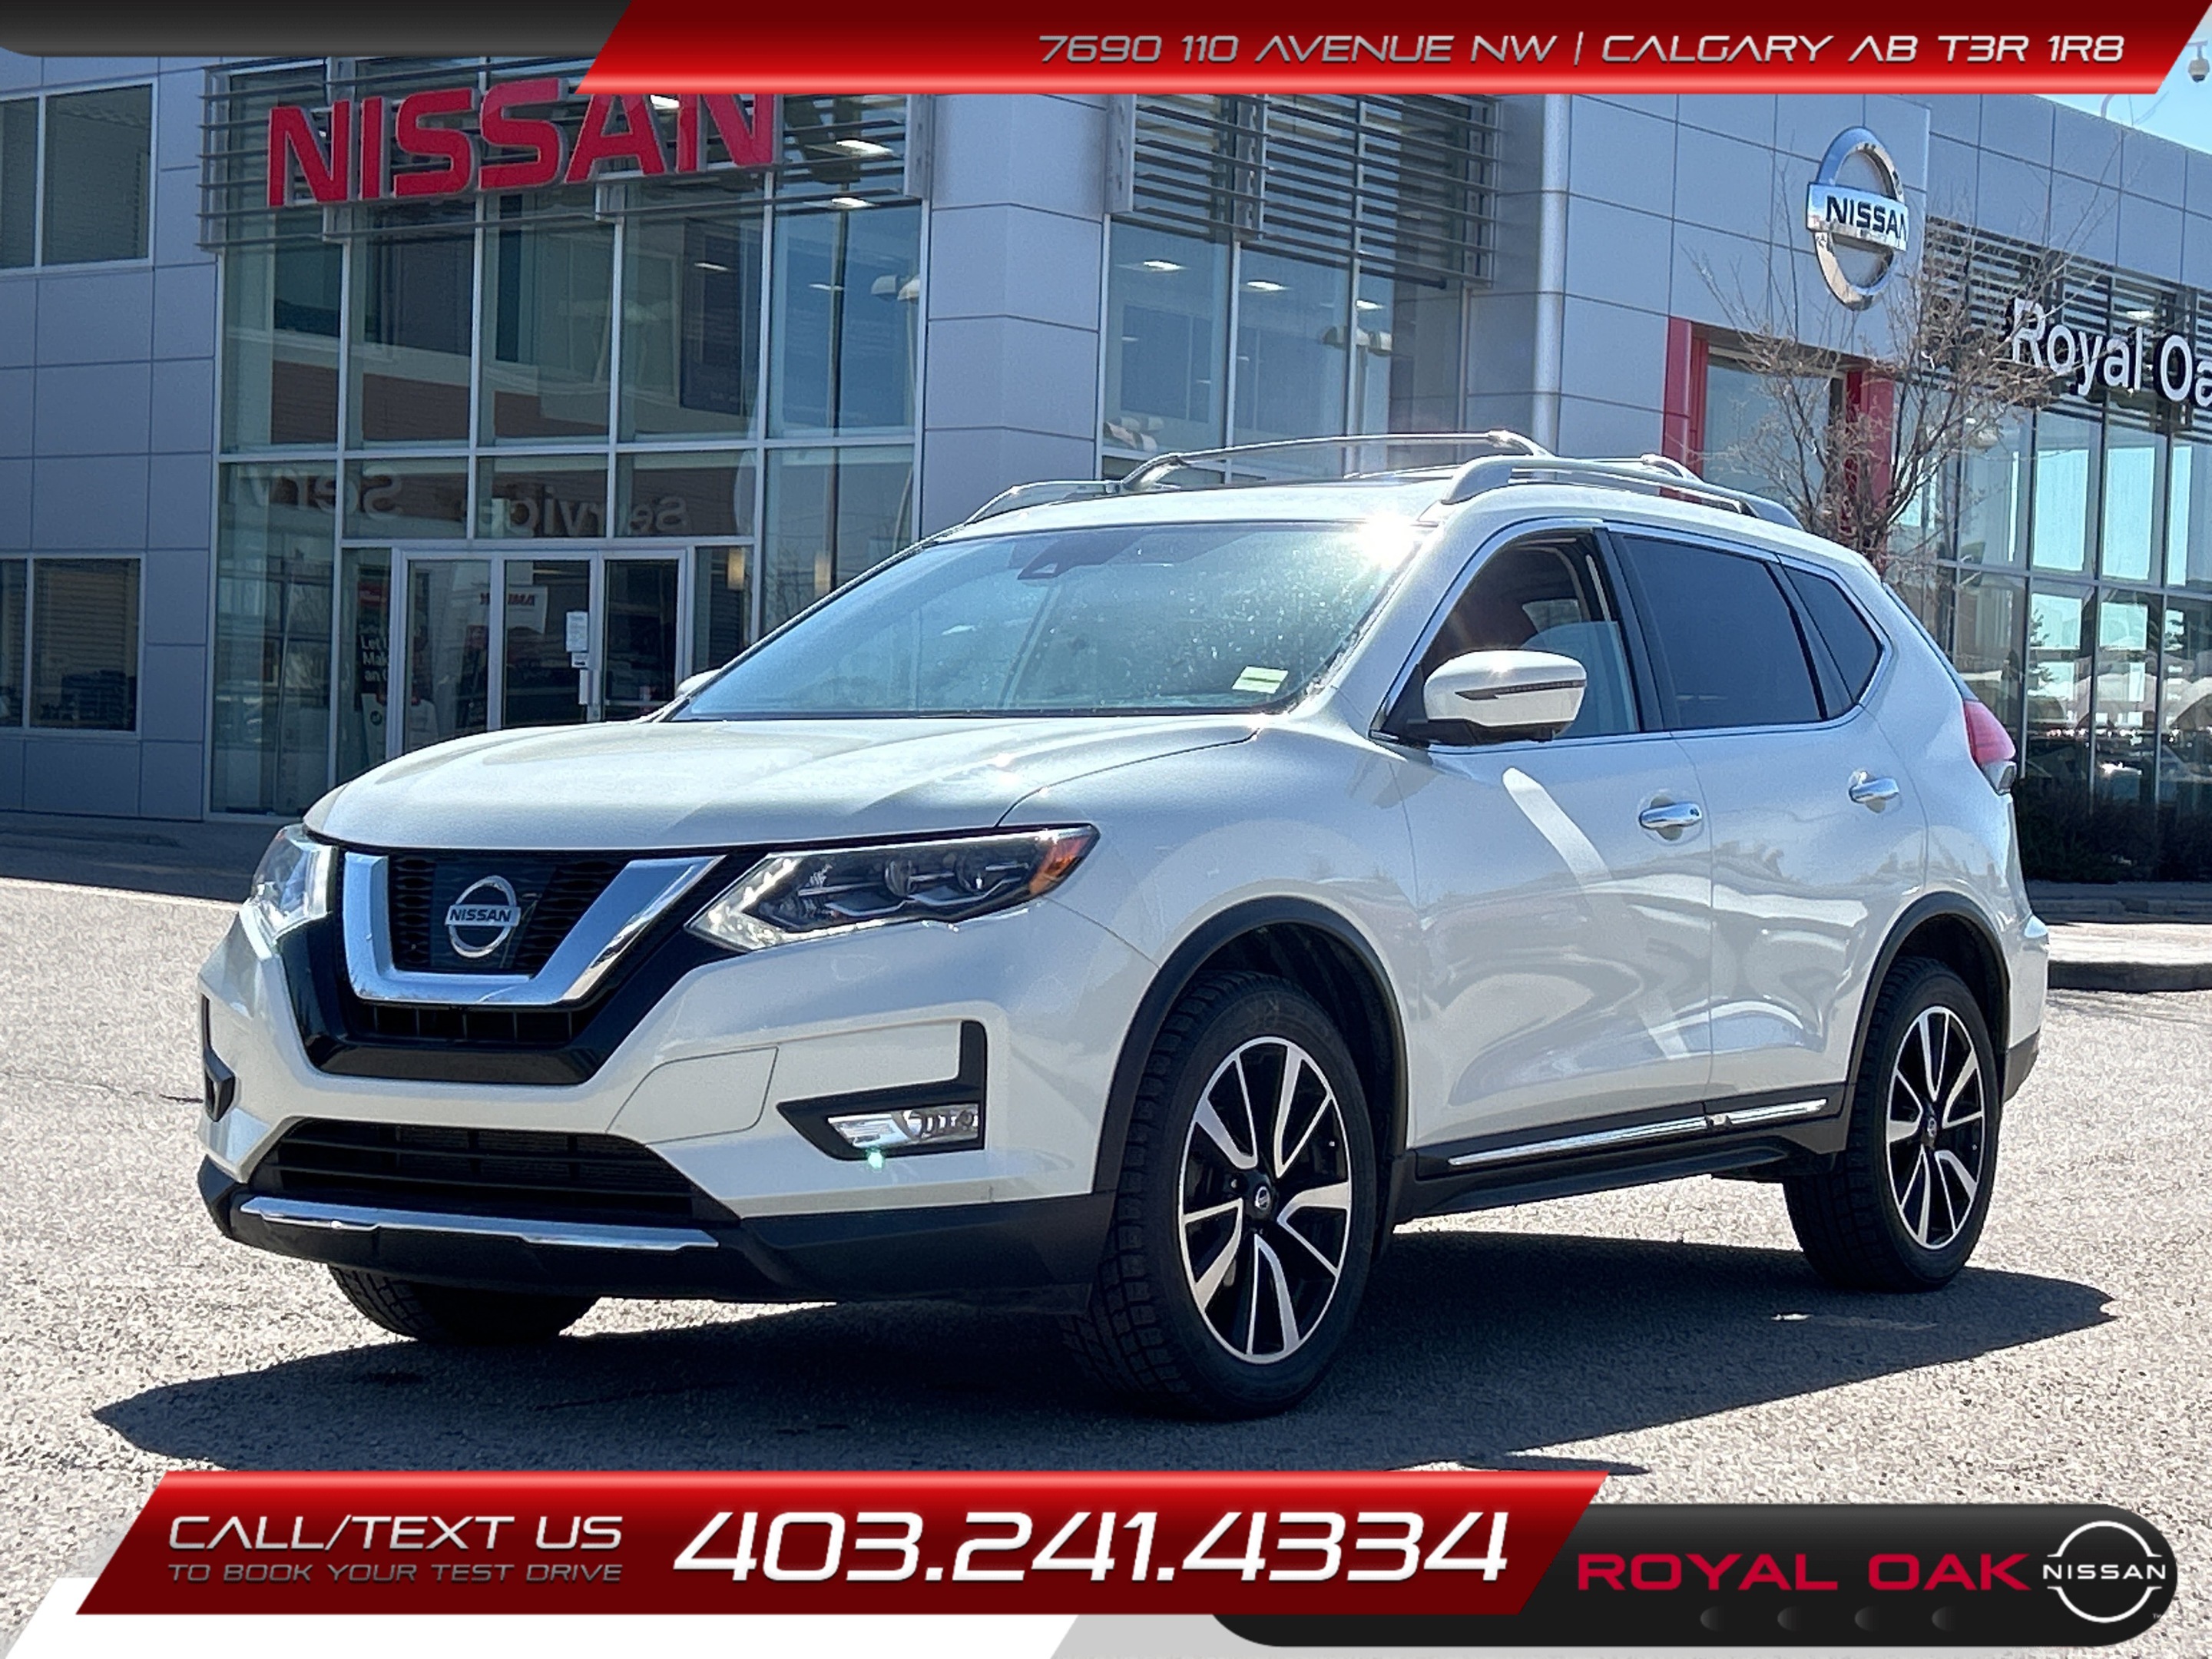 2017 Nissan Rogue AWD 4dr SL Platinum - Low KM's / Leather